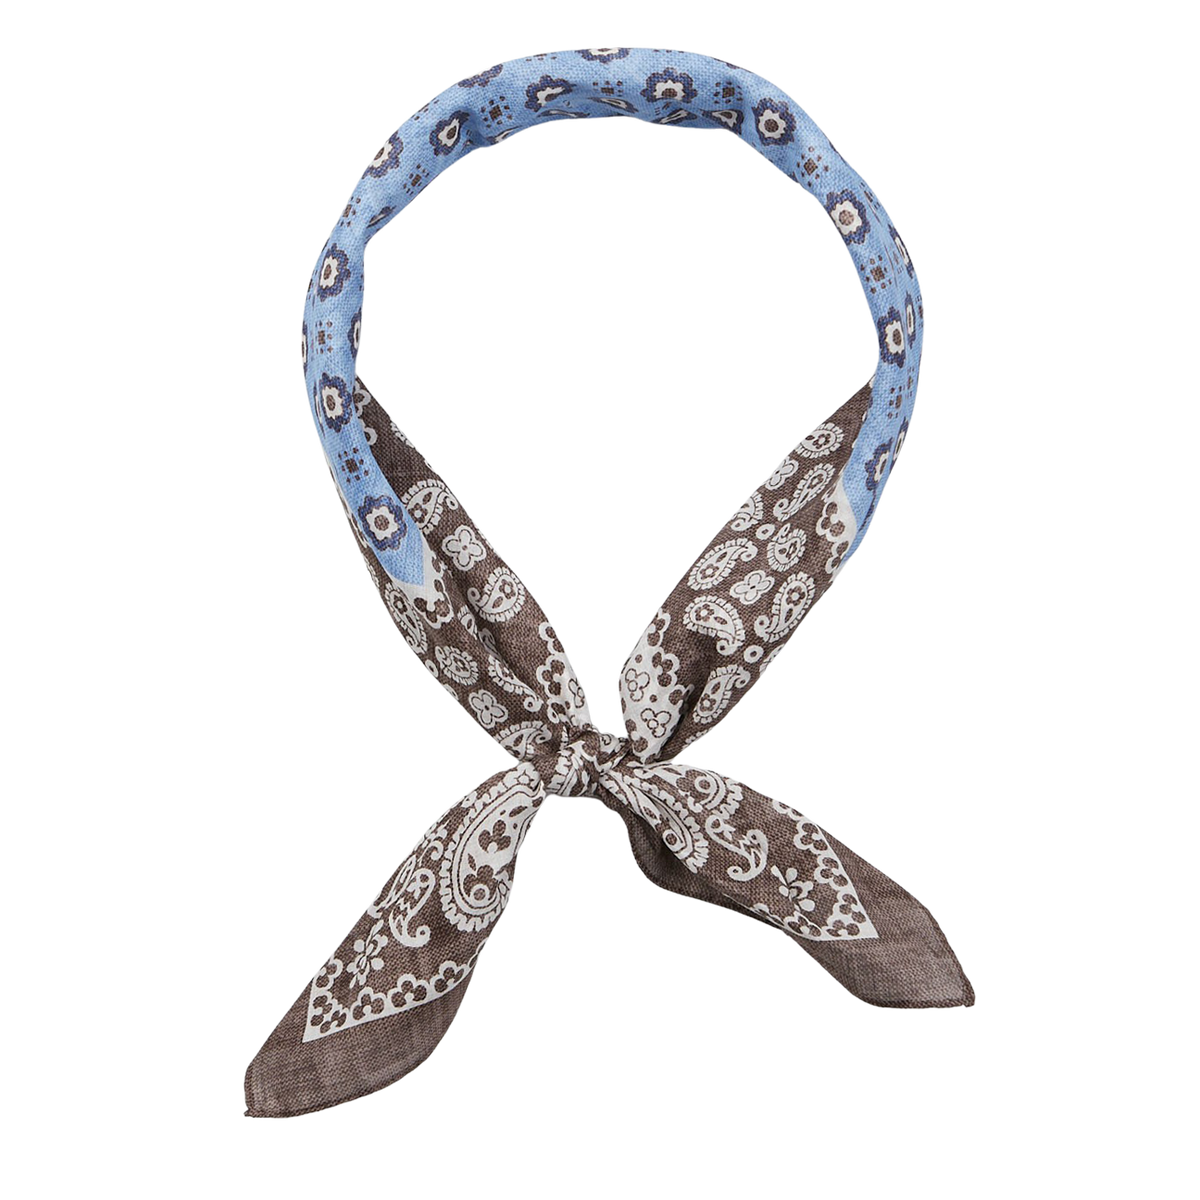 A Brown Melange Paisley Print Cotton Bandana tied in a knot against a white background by Amanda Christensen.